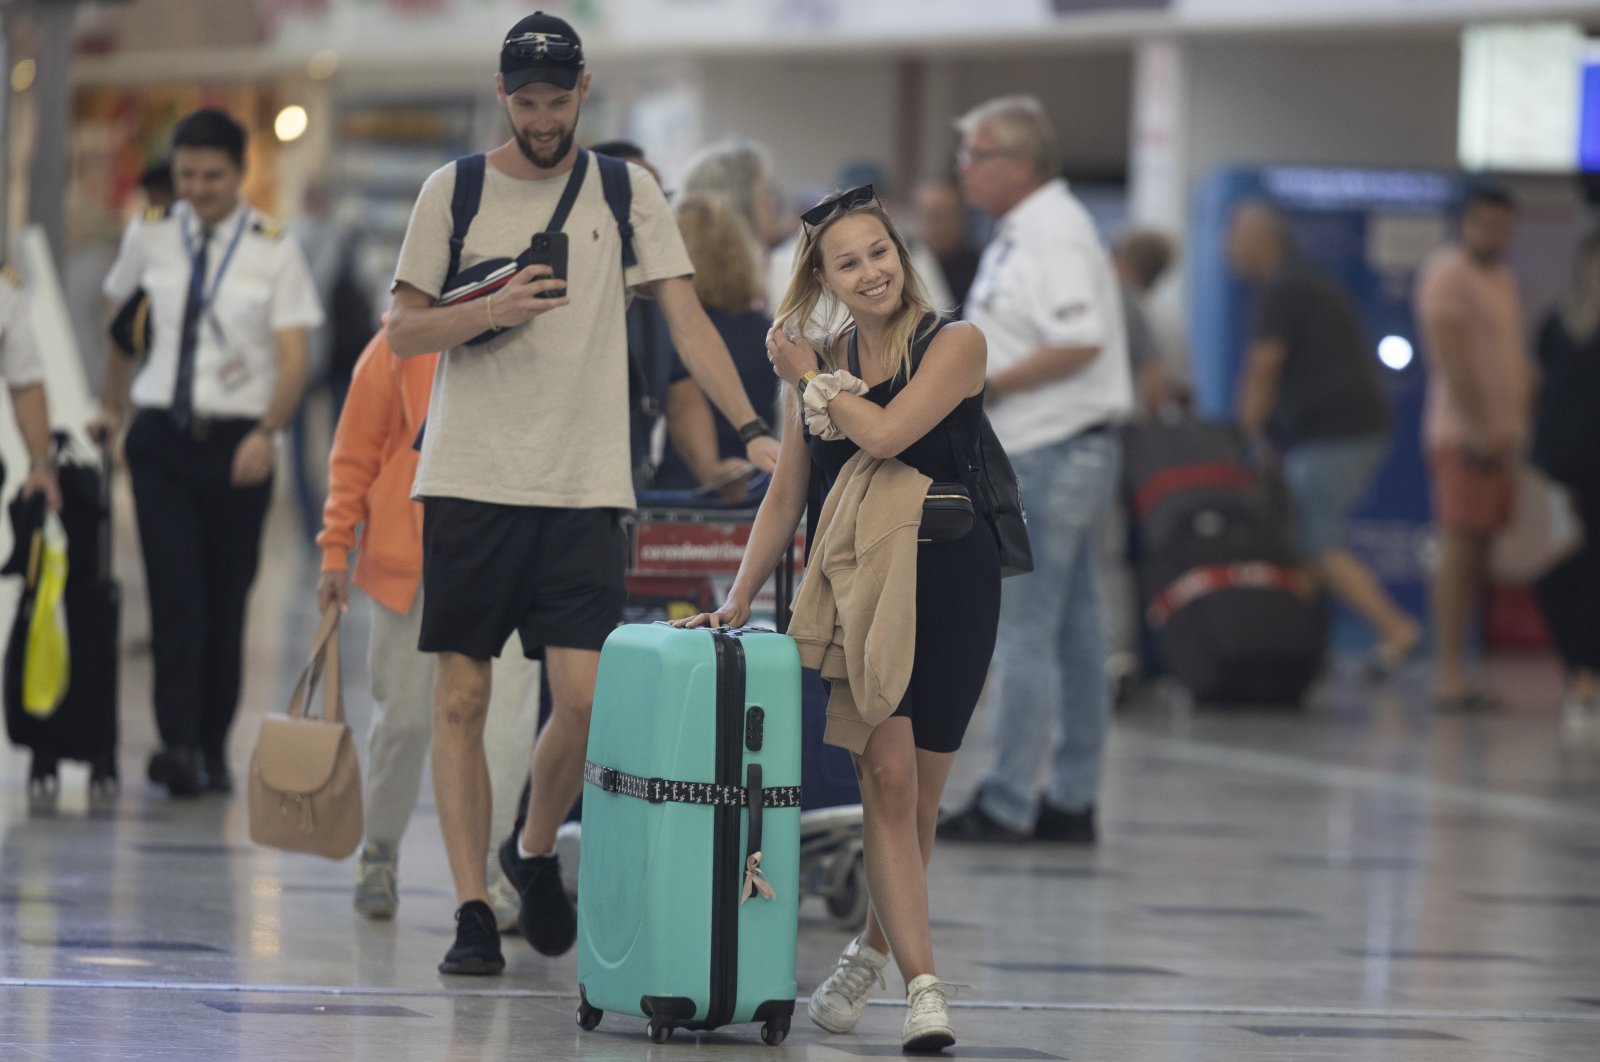 Tourists walk through Fraport TAV Antalya Airport, which is among the busiest airports in Europe and served more than 23 million passengers from 50 countries in 8.5 months in 2022, Antalya, Türkiye, Sept. 21, 2022. (AA Photo)